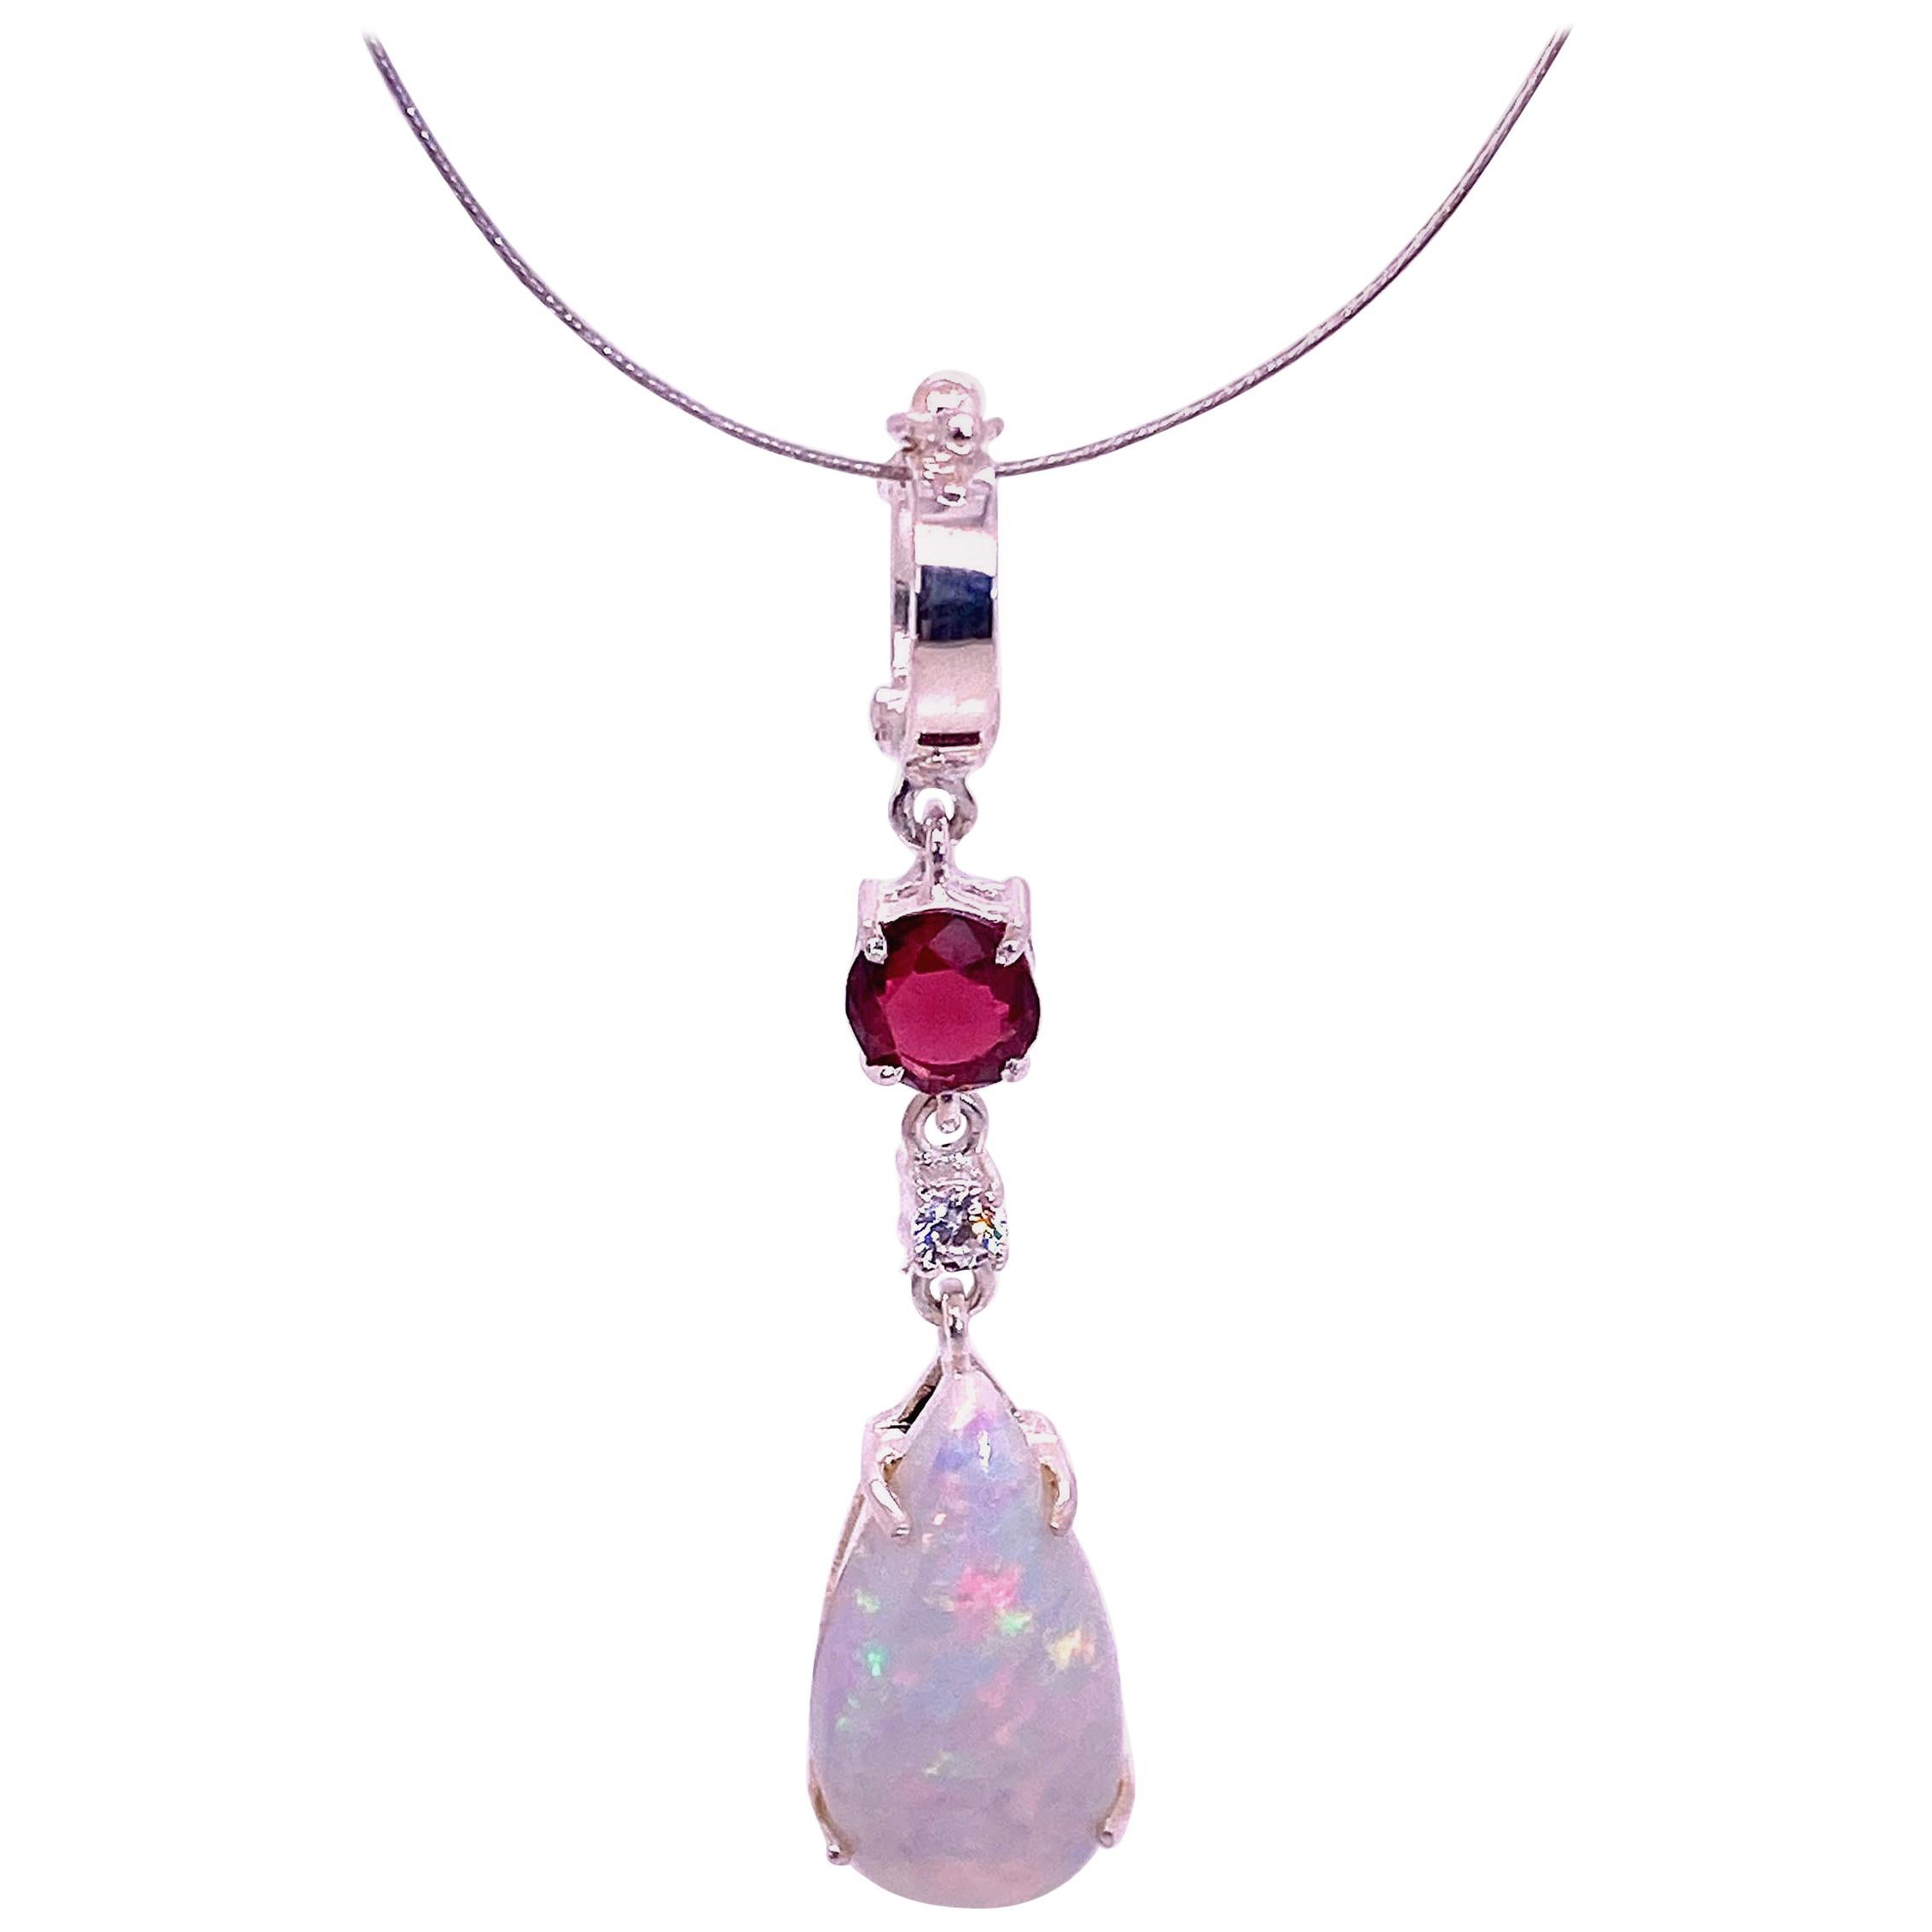 AJD Sparkling Opal Pendant with Accents of Garnet and Zircon